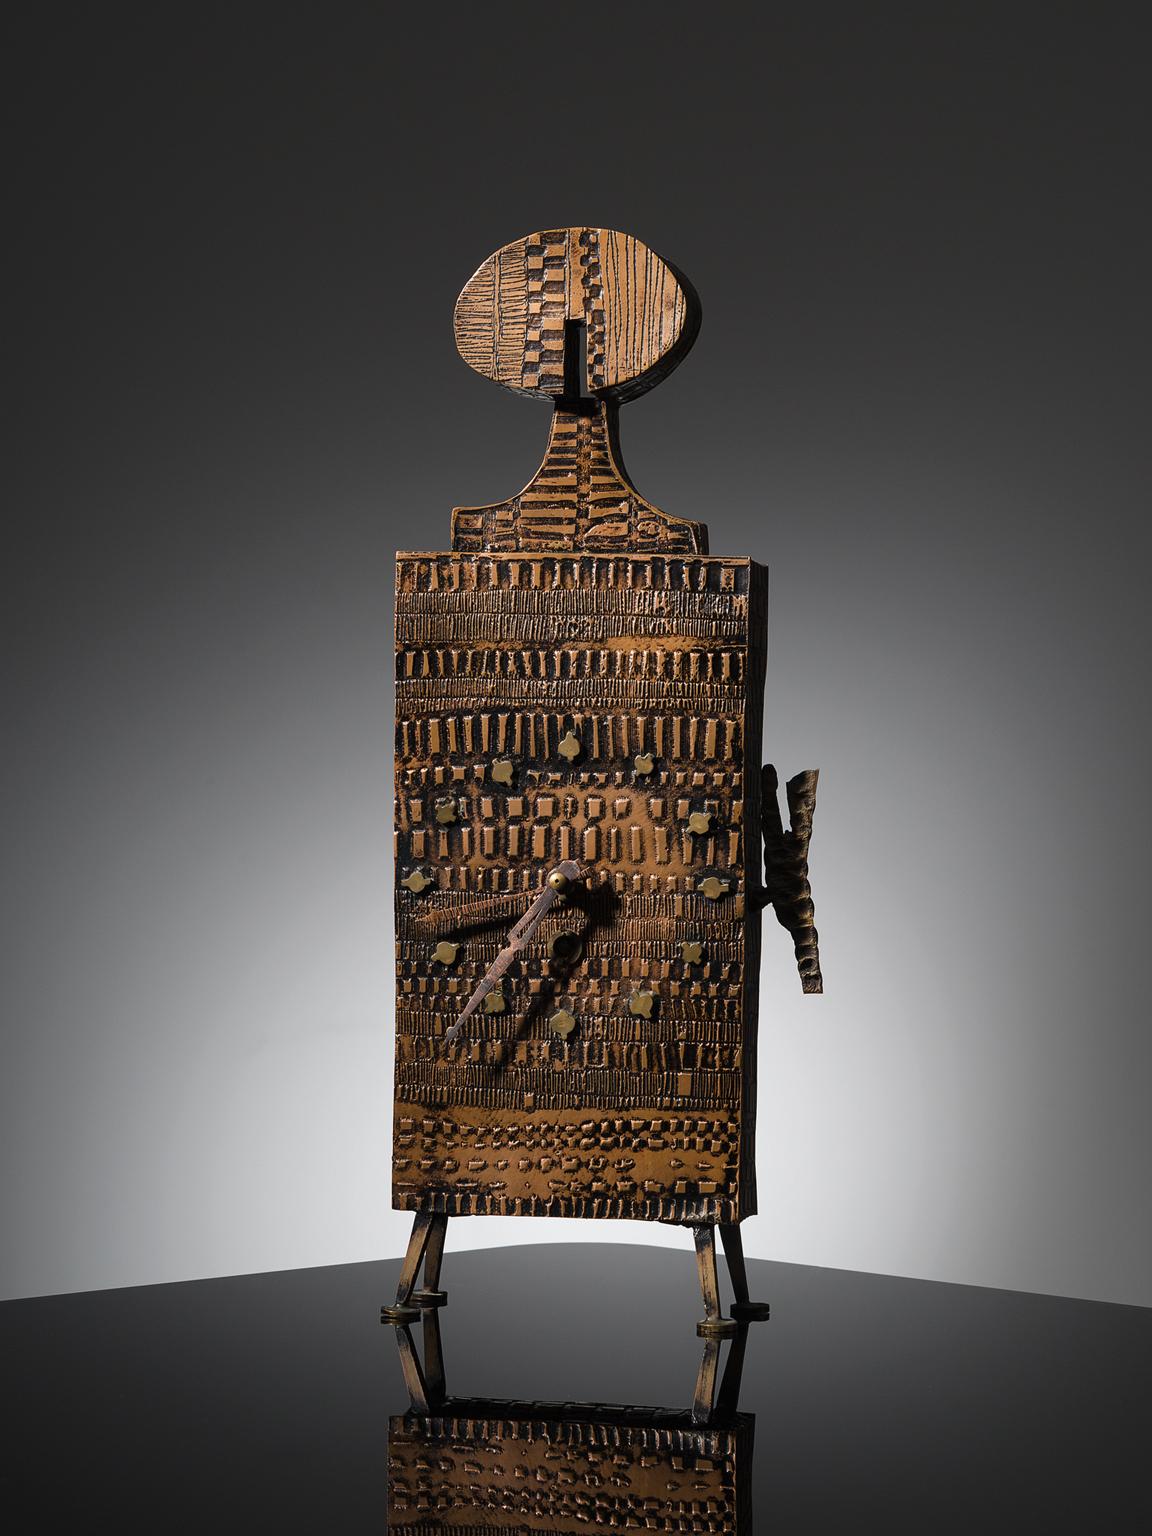 Lorenzo Burchiellaro, table clock, copper, brass, Italy, circa 1965

This figurative table clock is designed by Lorenzo Burchiellaro. It is executed with a copper body and has brass details such as the legs and dial. This specific piece is an